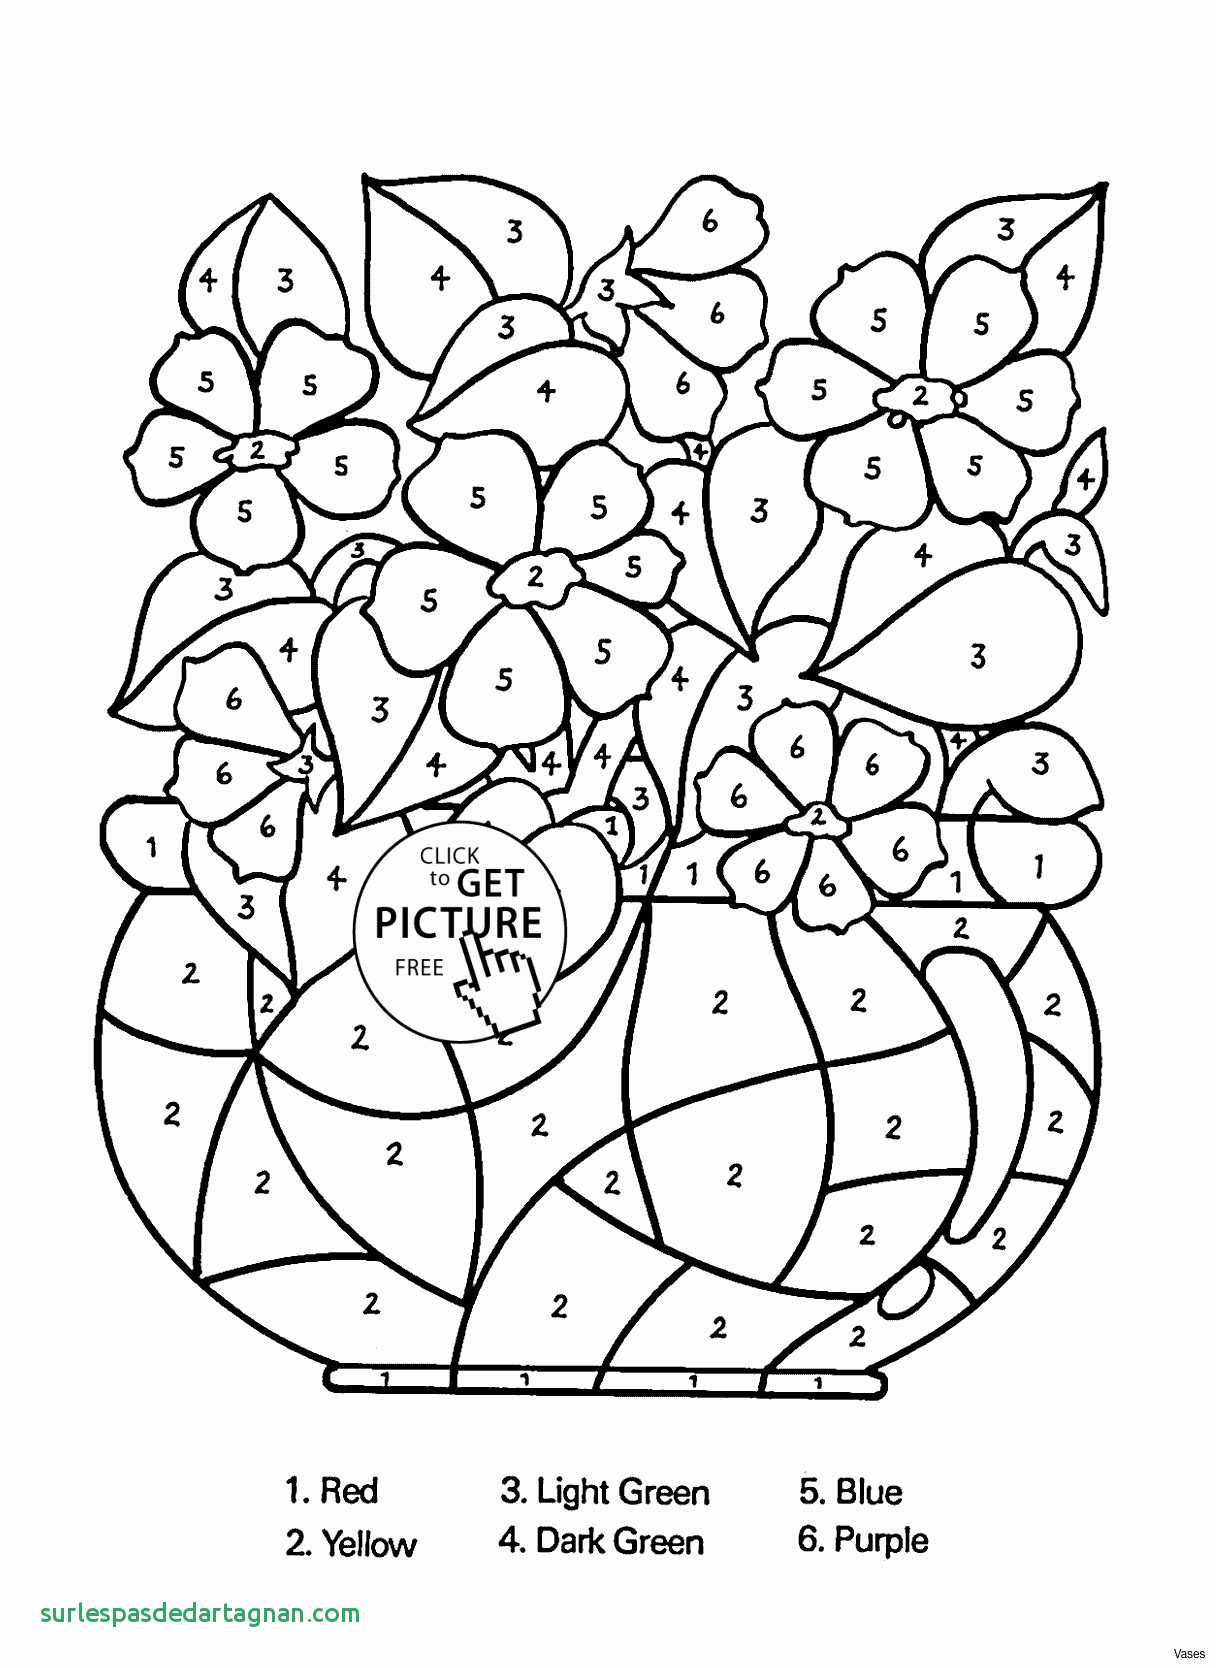 flower vase store of marker coloring page vases flower vase coloring page pages flowers regarding marker coloring page vases flower vase coloring page pages flowers in a top i 0d dot